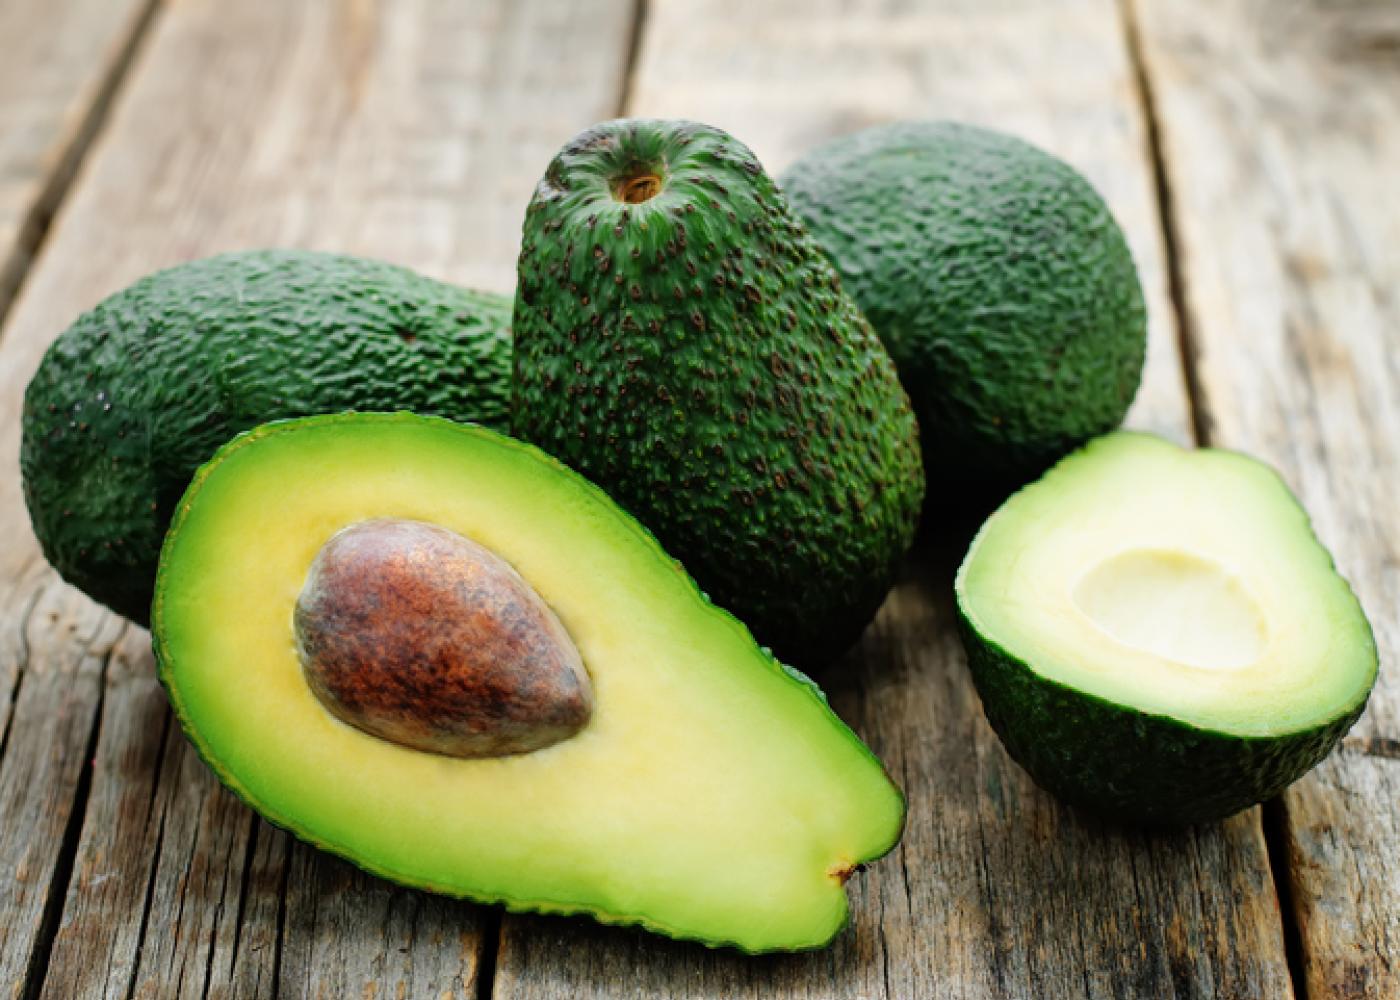 Here are 5 excellent alternatives to avocados that offer similar health benefits: